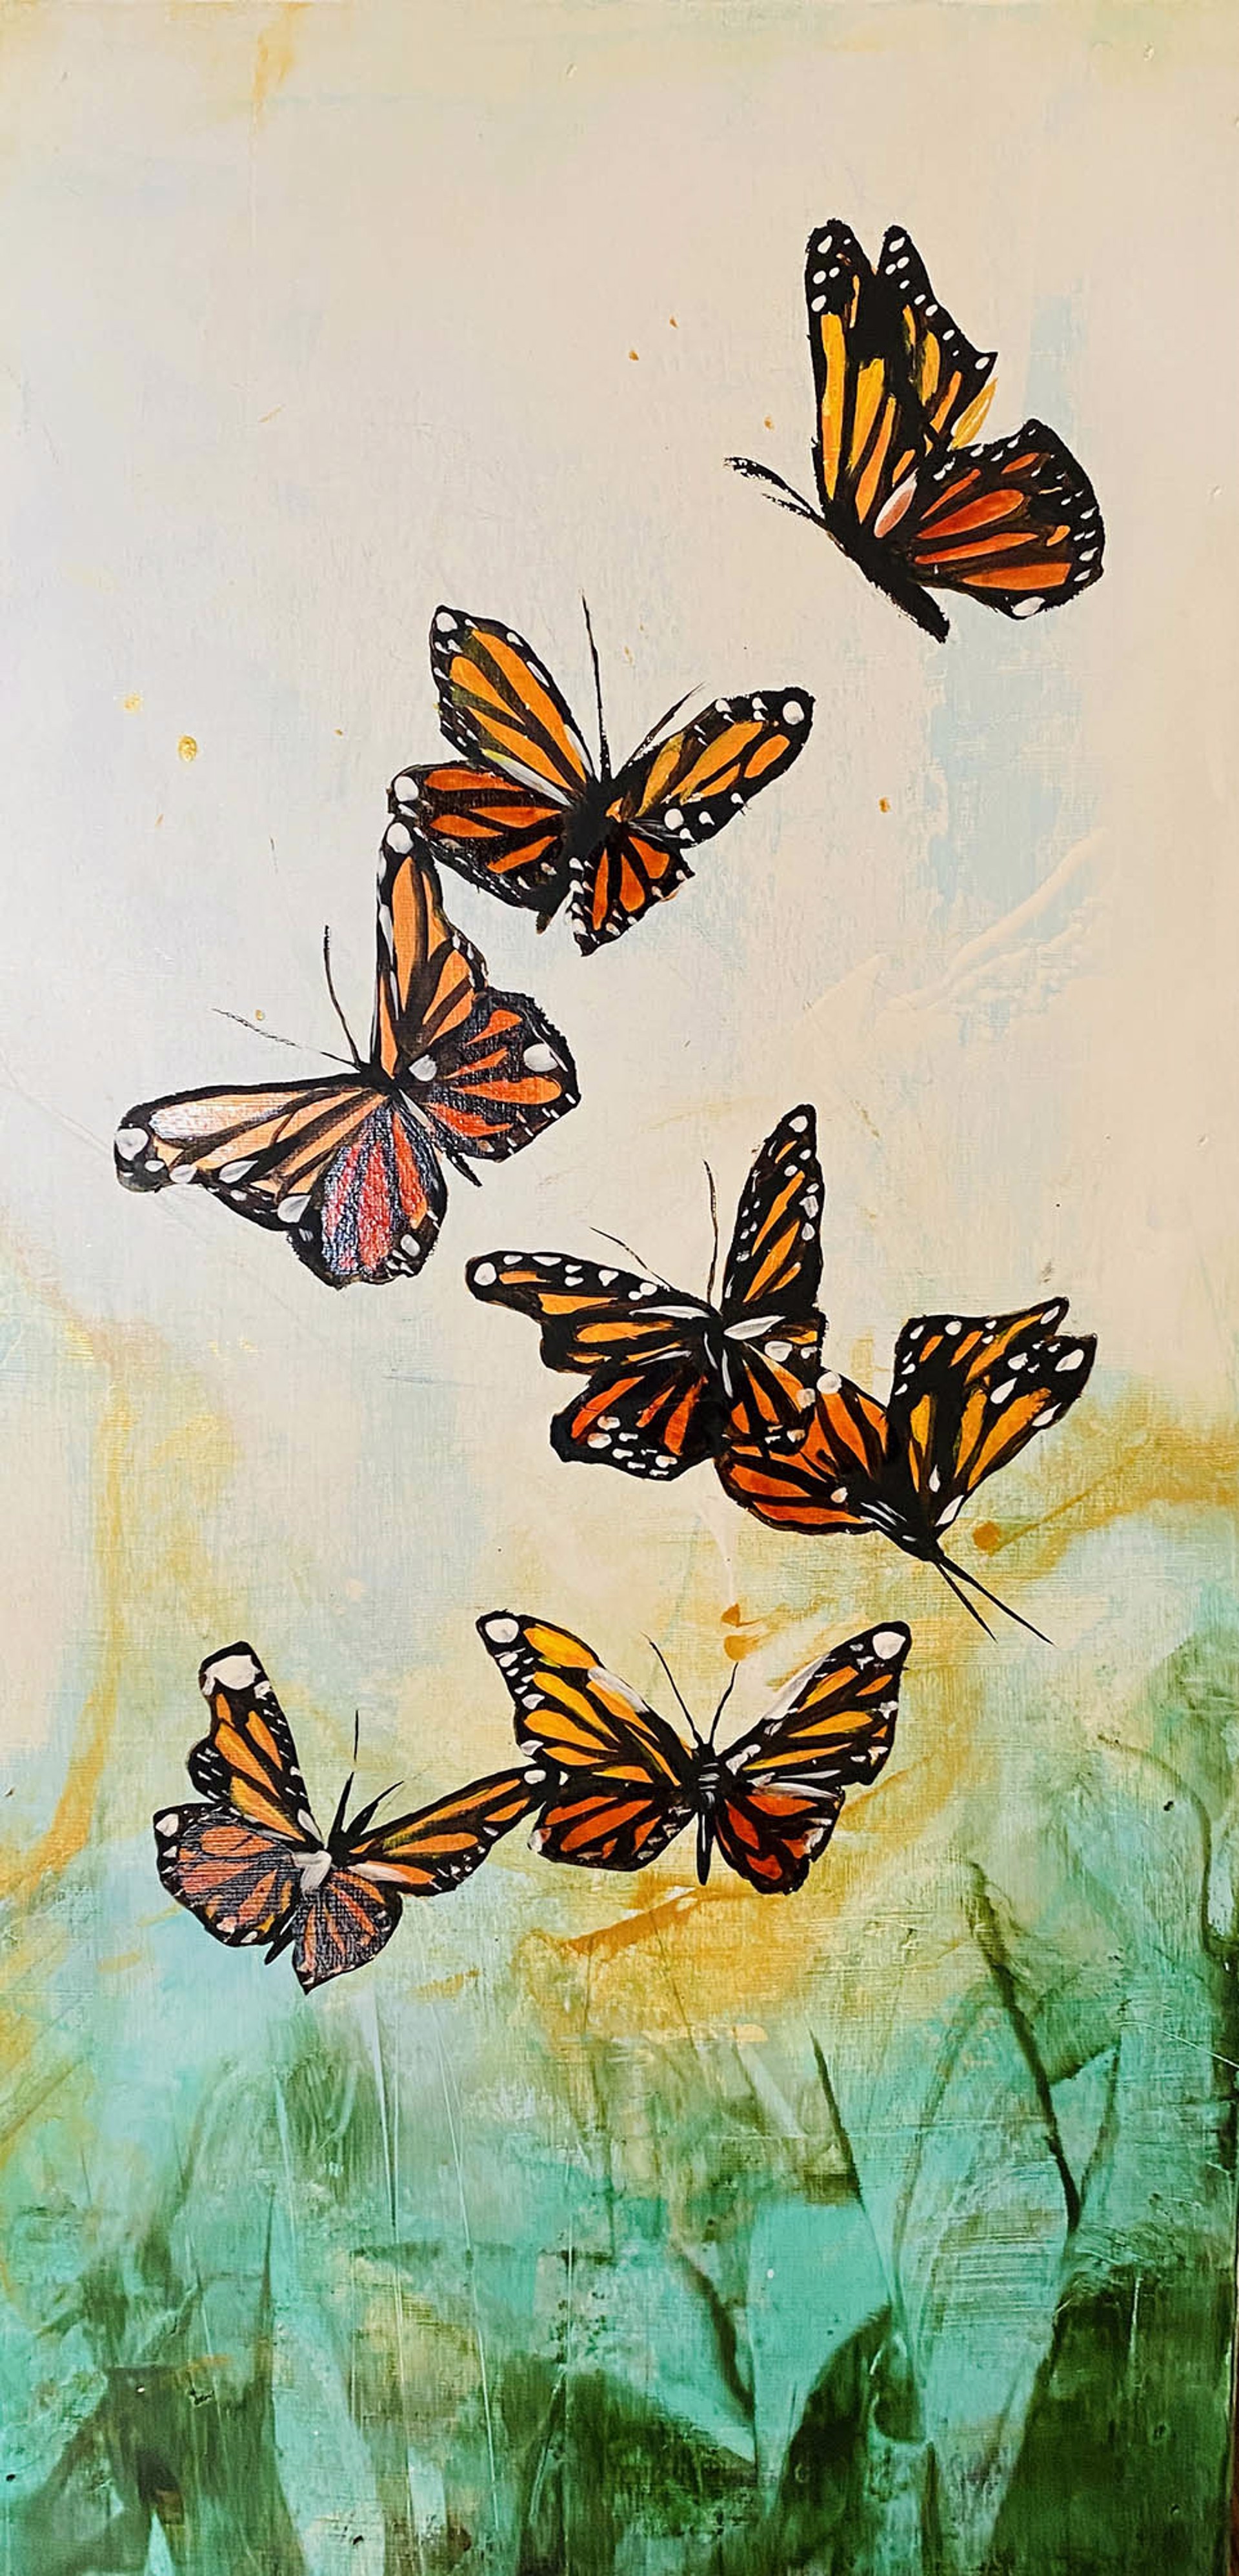 Original Oil Painting Featuring A Flurry Of Monarch Butterflies Over Abstract Green Background